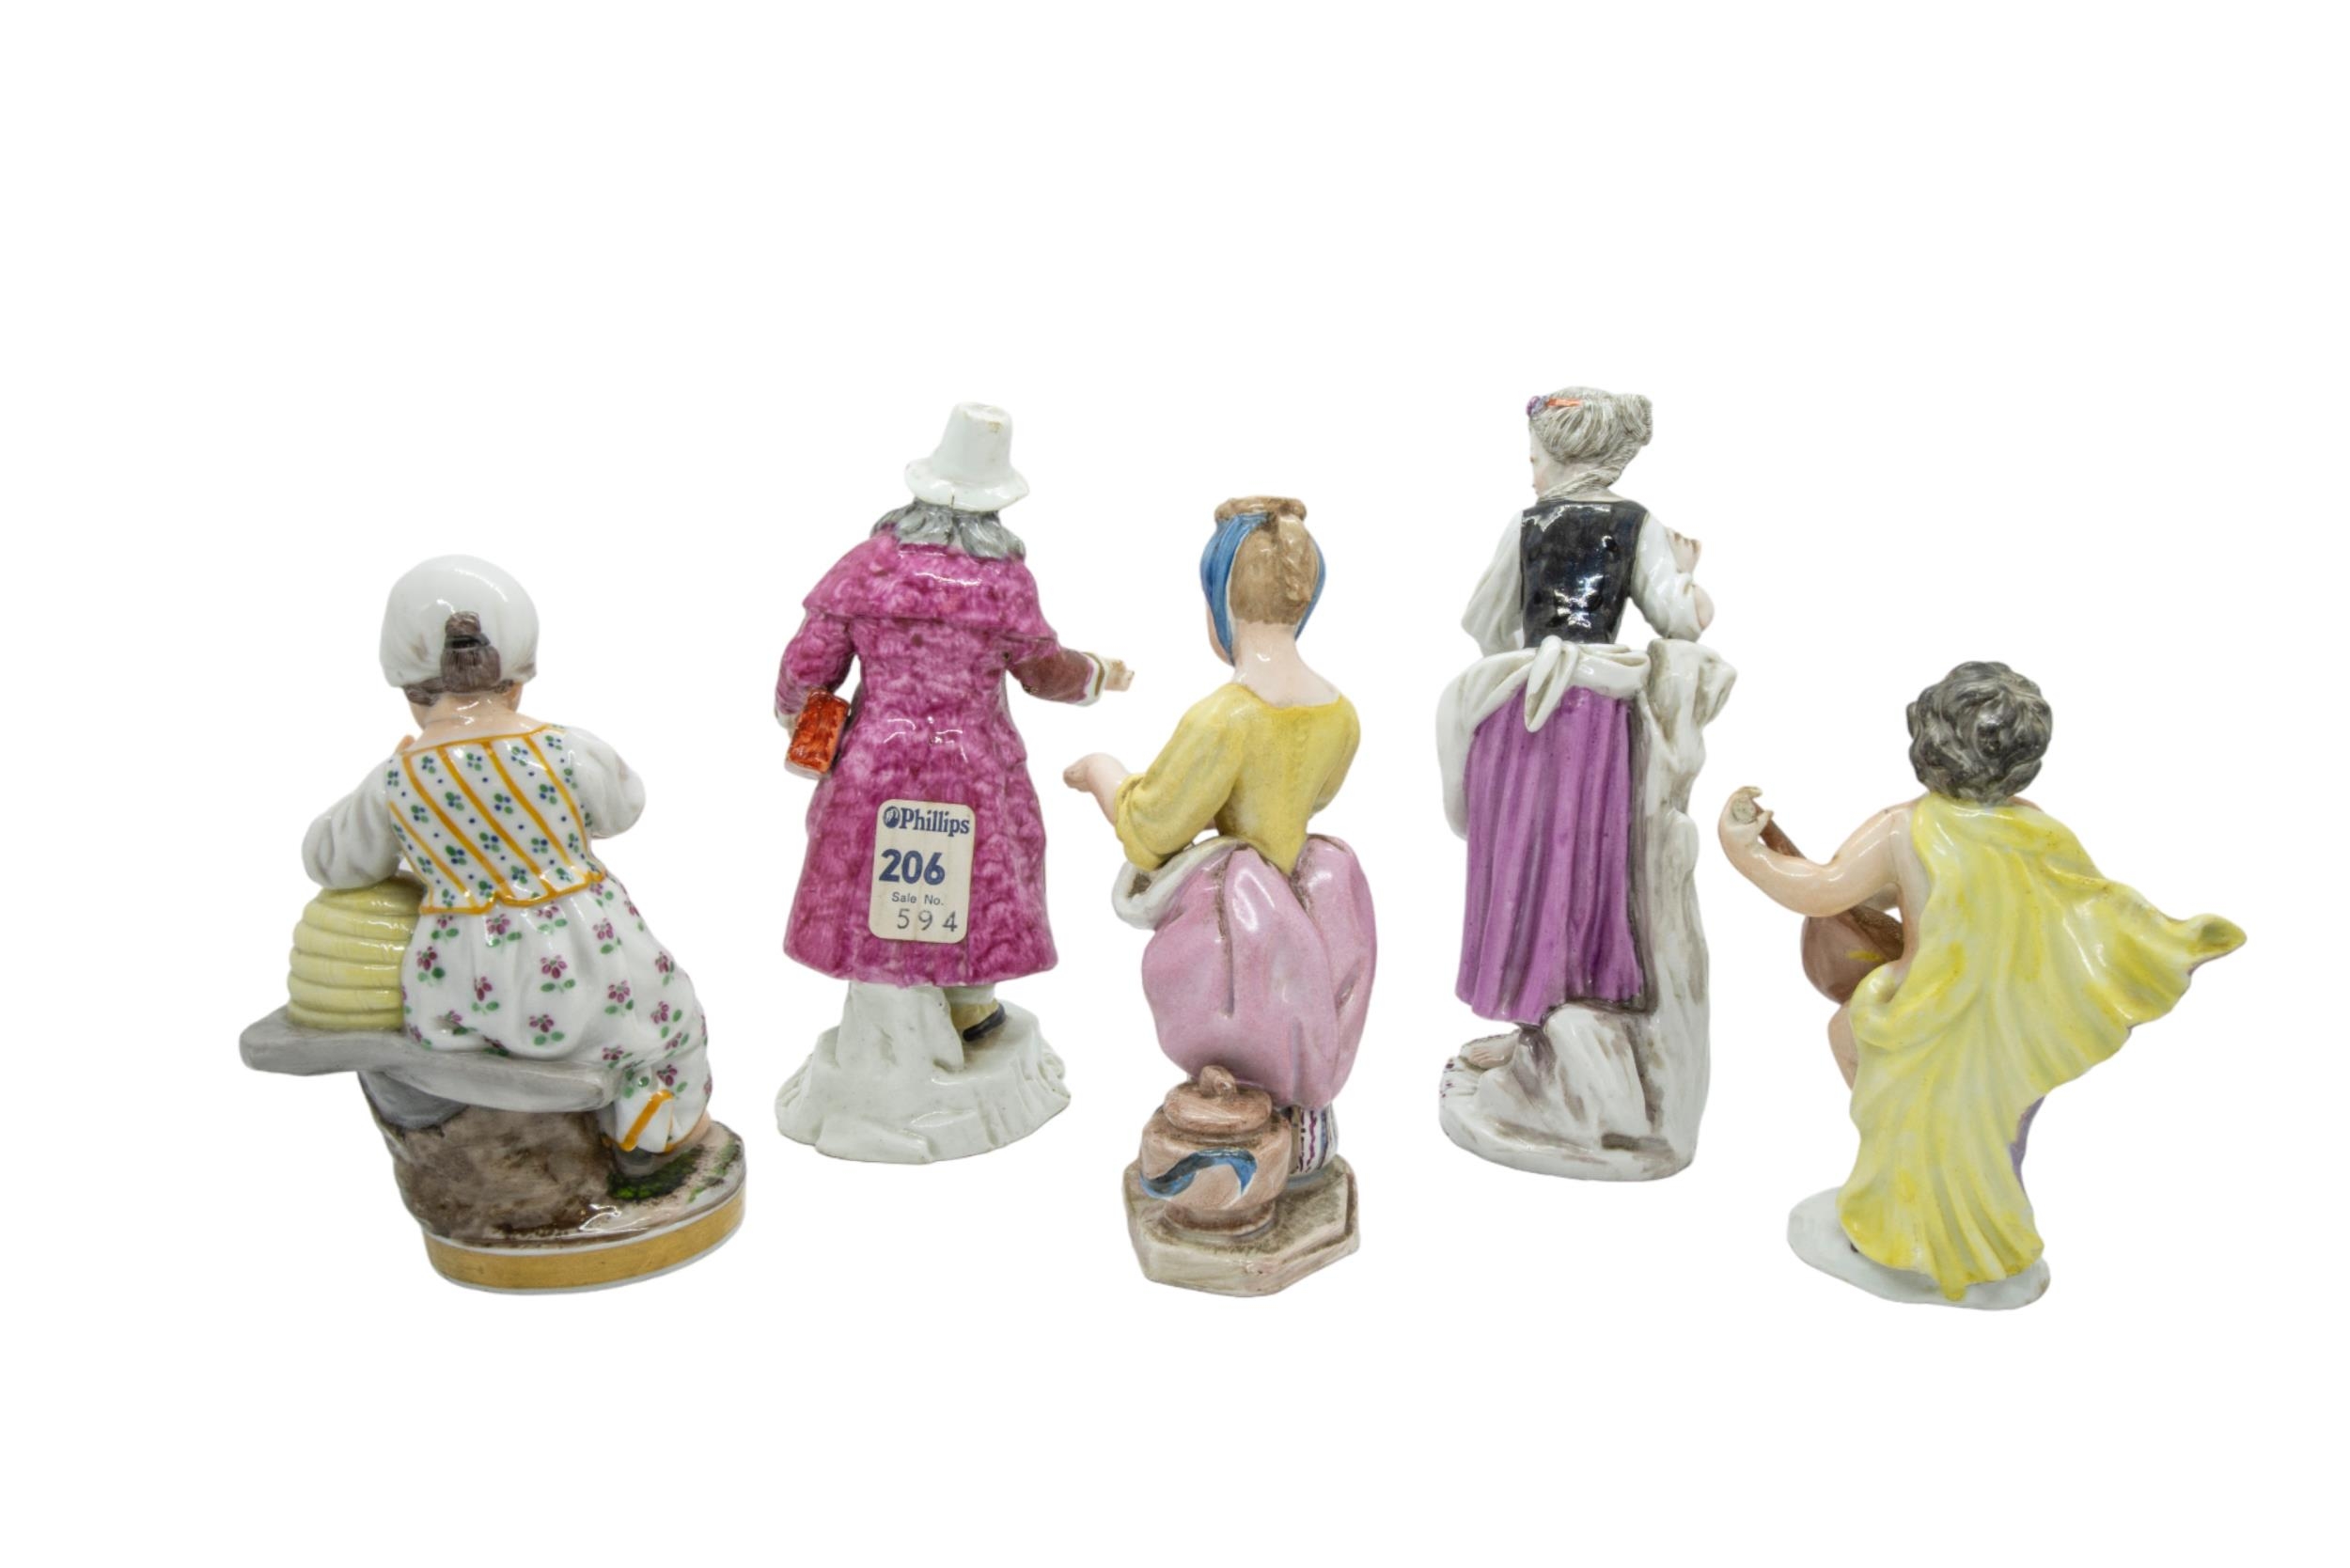 A MIXED GROUP OF FIVE PORCELAIN FIGURES, 18TH/19TH CENTURY, the lot includes a figurine of a girl, - Image 2 of 3